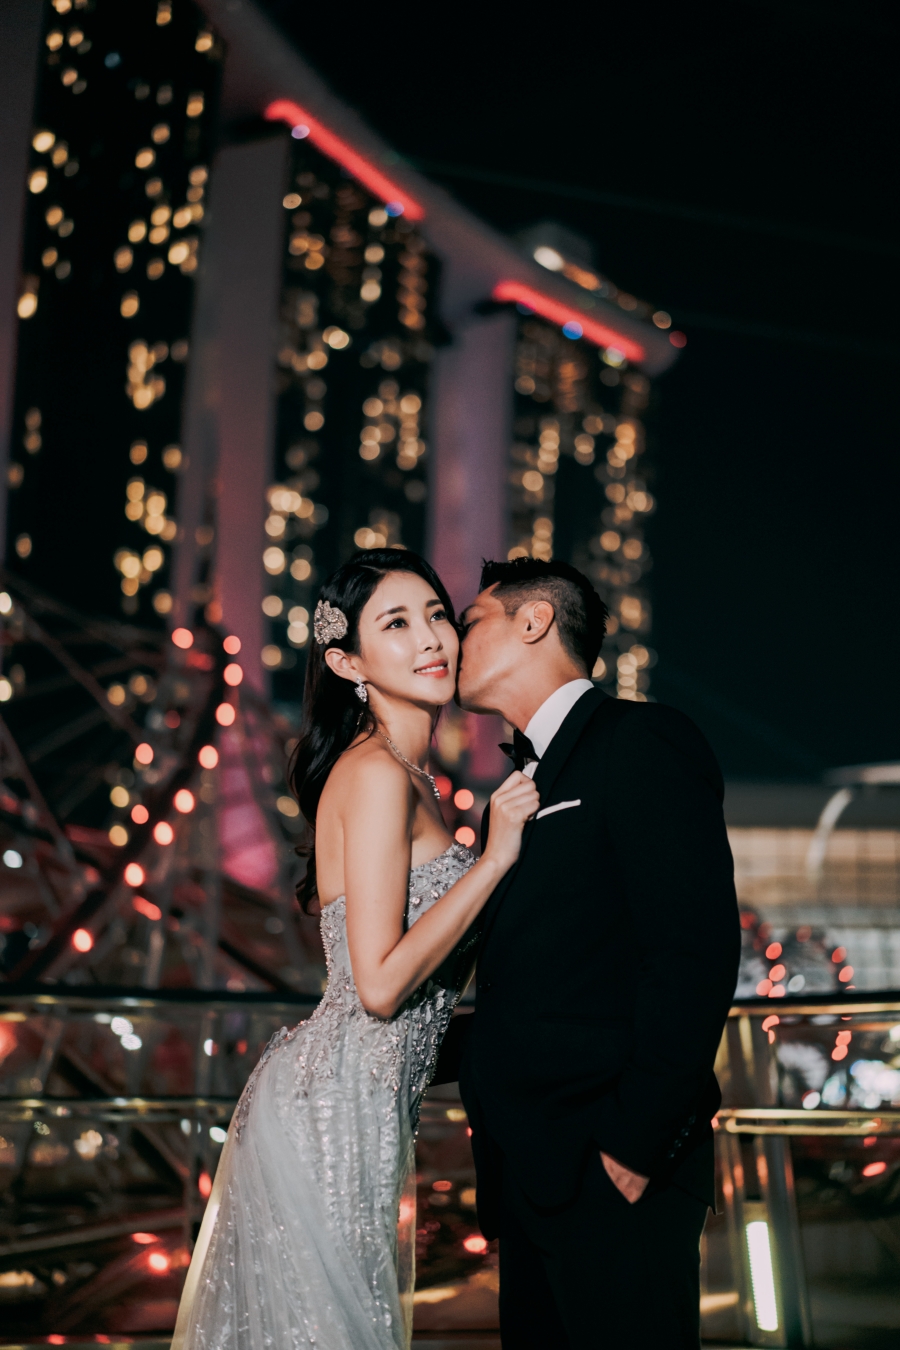 Singapore Pre-Wedding Photoshoot At Cloud Forest, Fort Canning Spiral Staircase And Marina Bay For Korean Couple  by Michael  on OneThreeOneFour 14